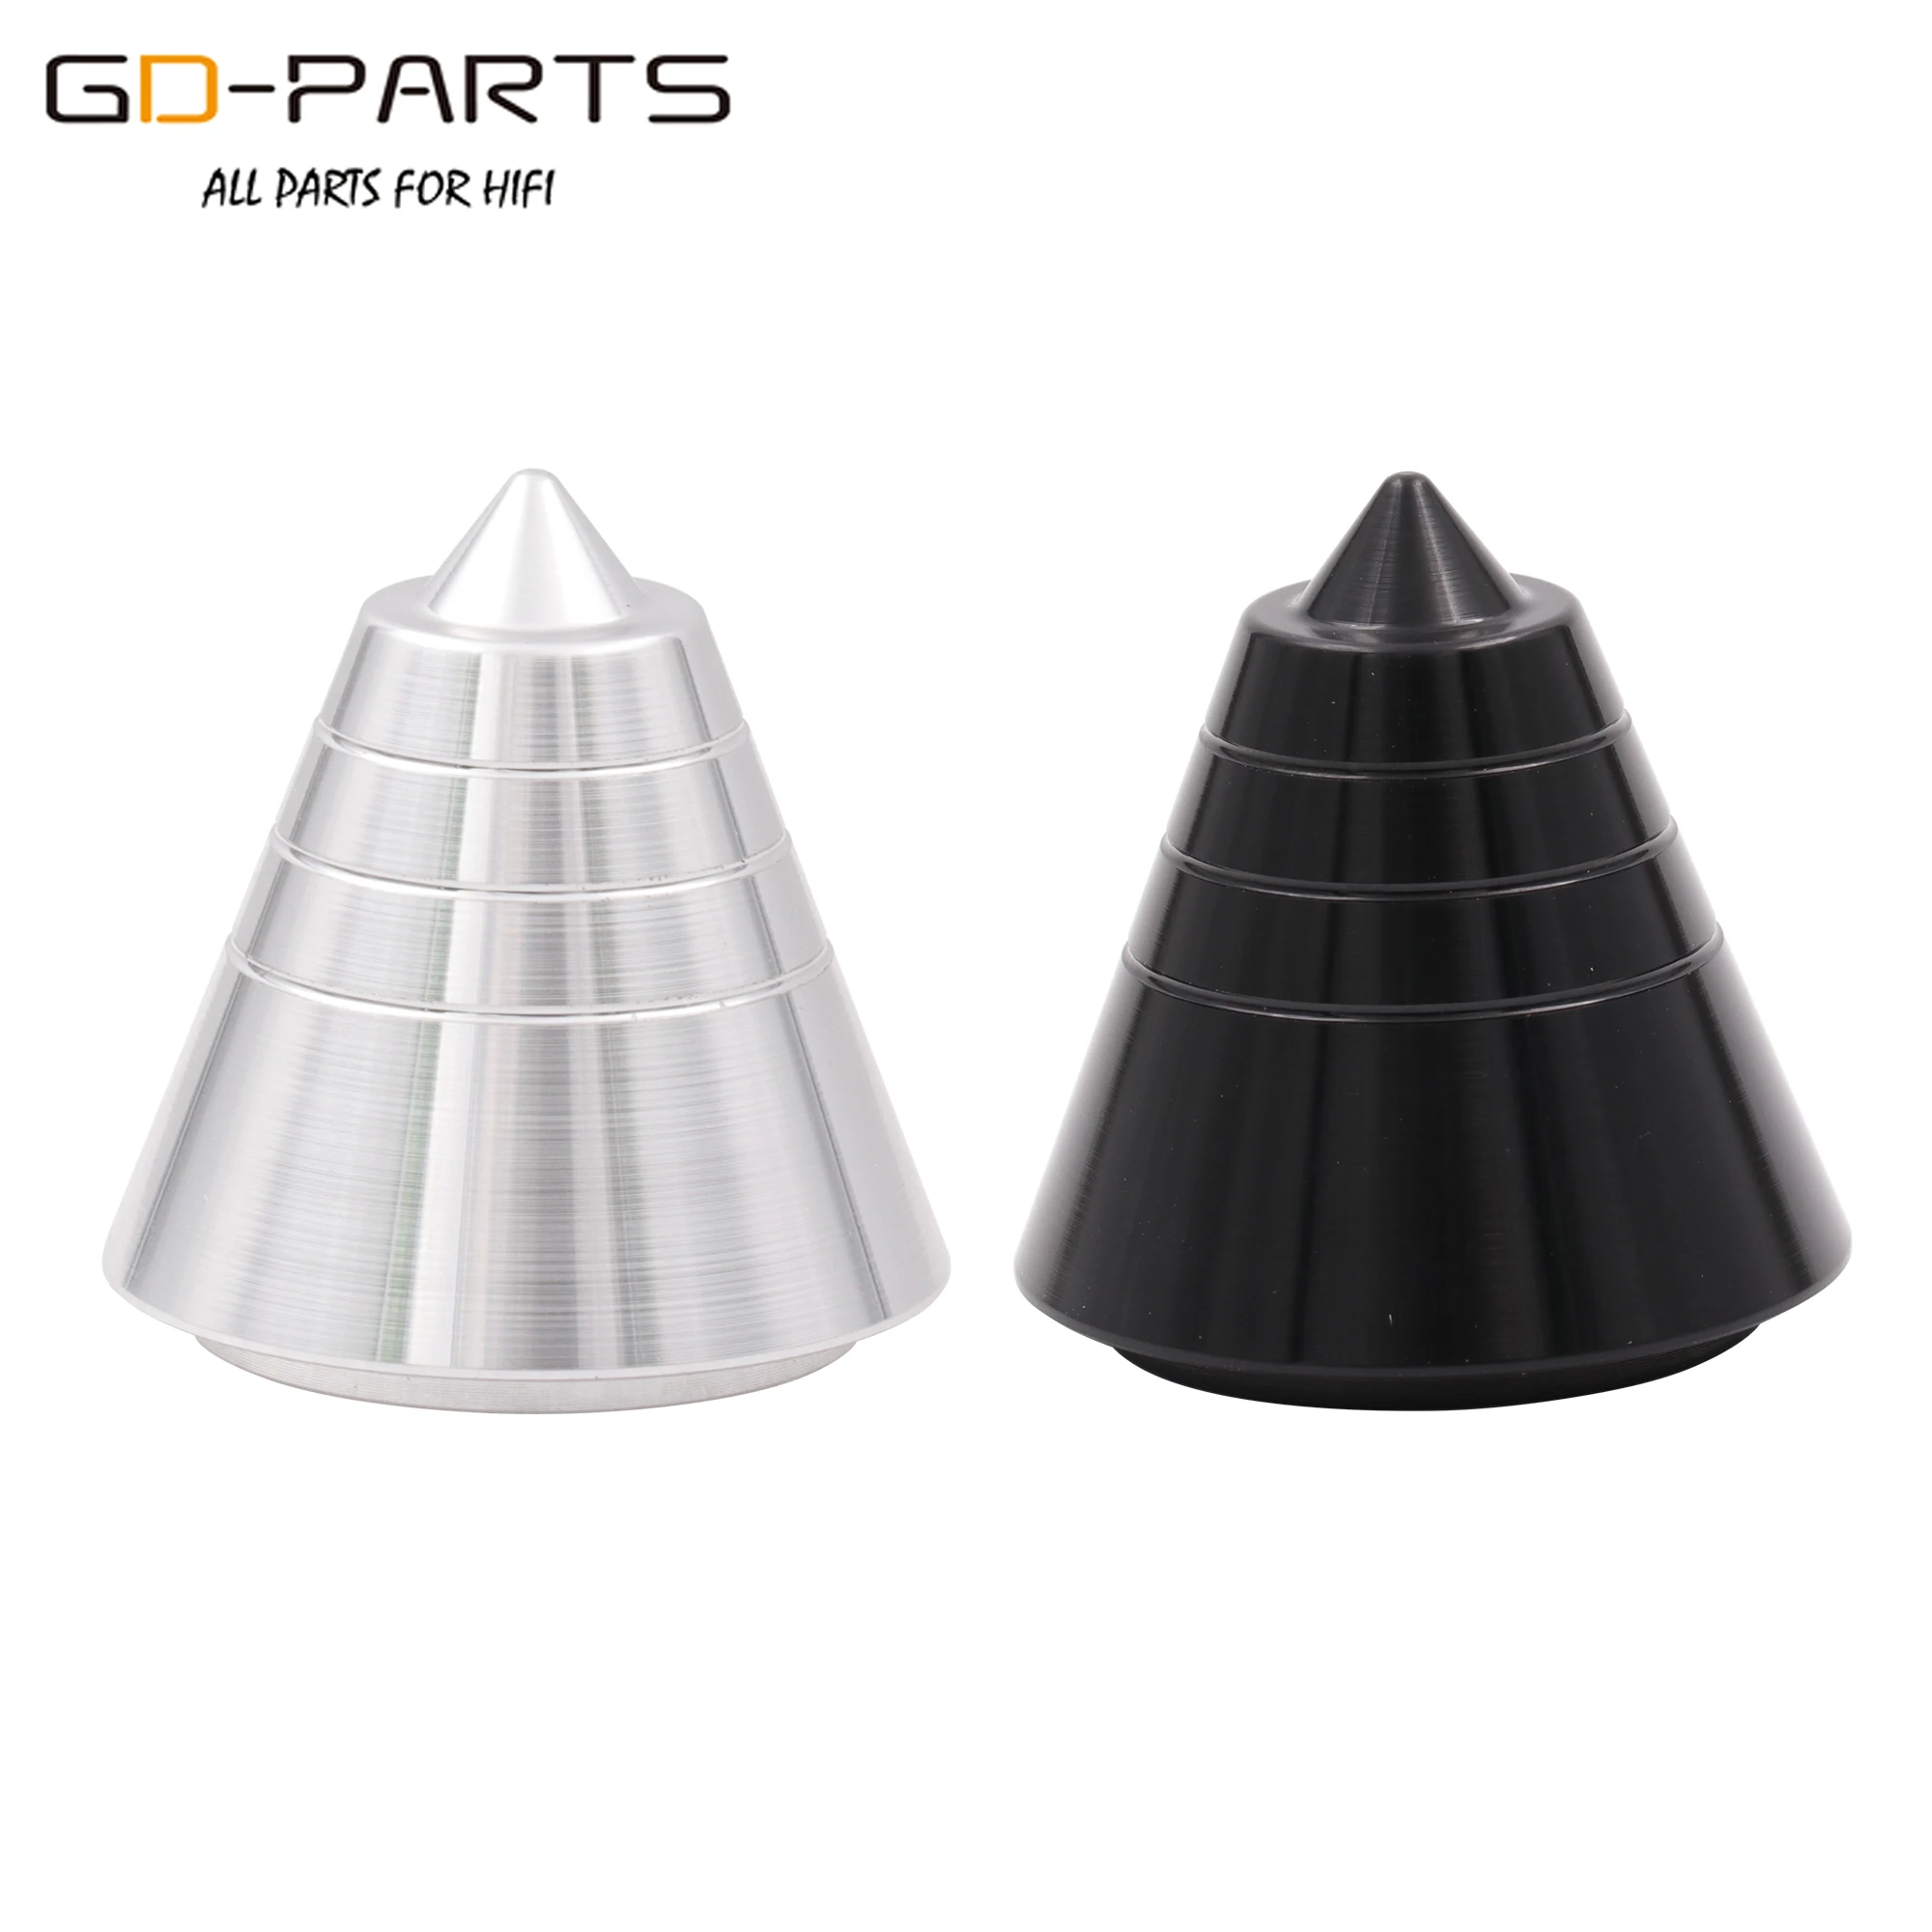 

Machined Solid Aluminum Isolation Spike Cone Feet Stand Damper For Hifi Turntable Speaker AMP 30x31mm 39x31mm 44x31mm M6 M8 Bolt